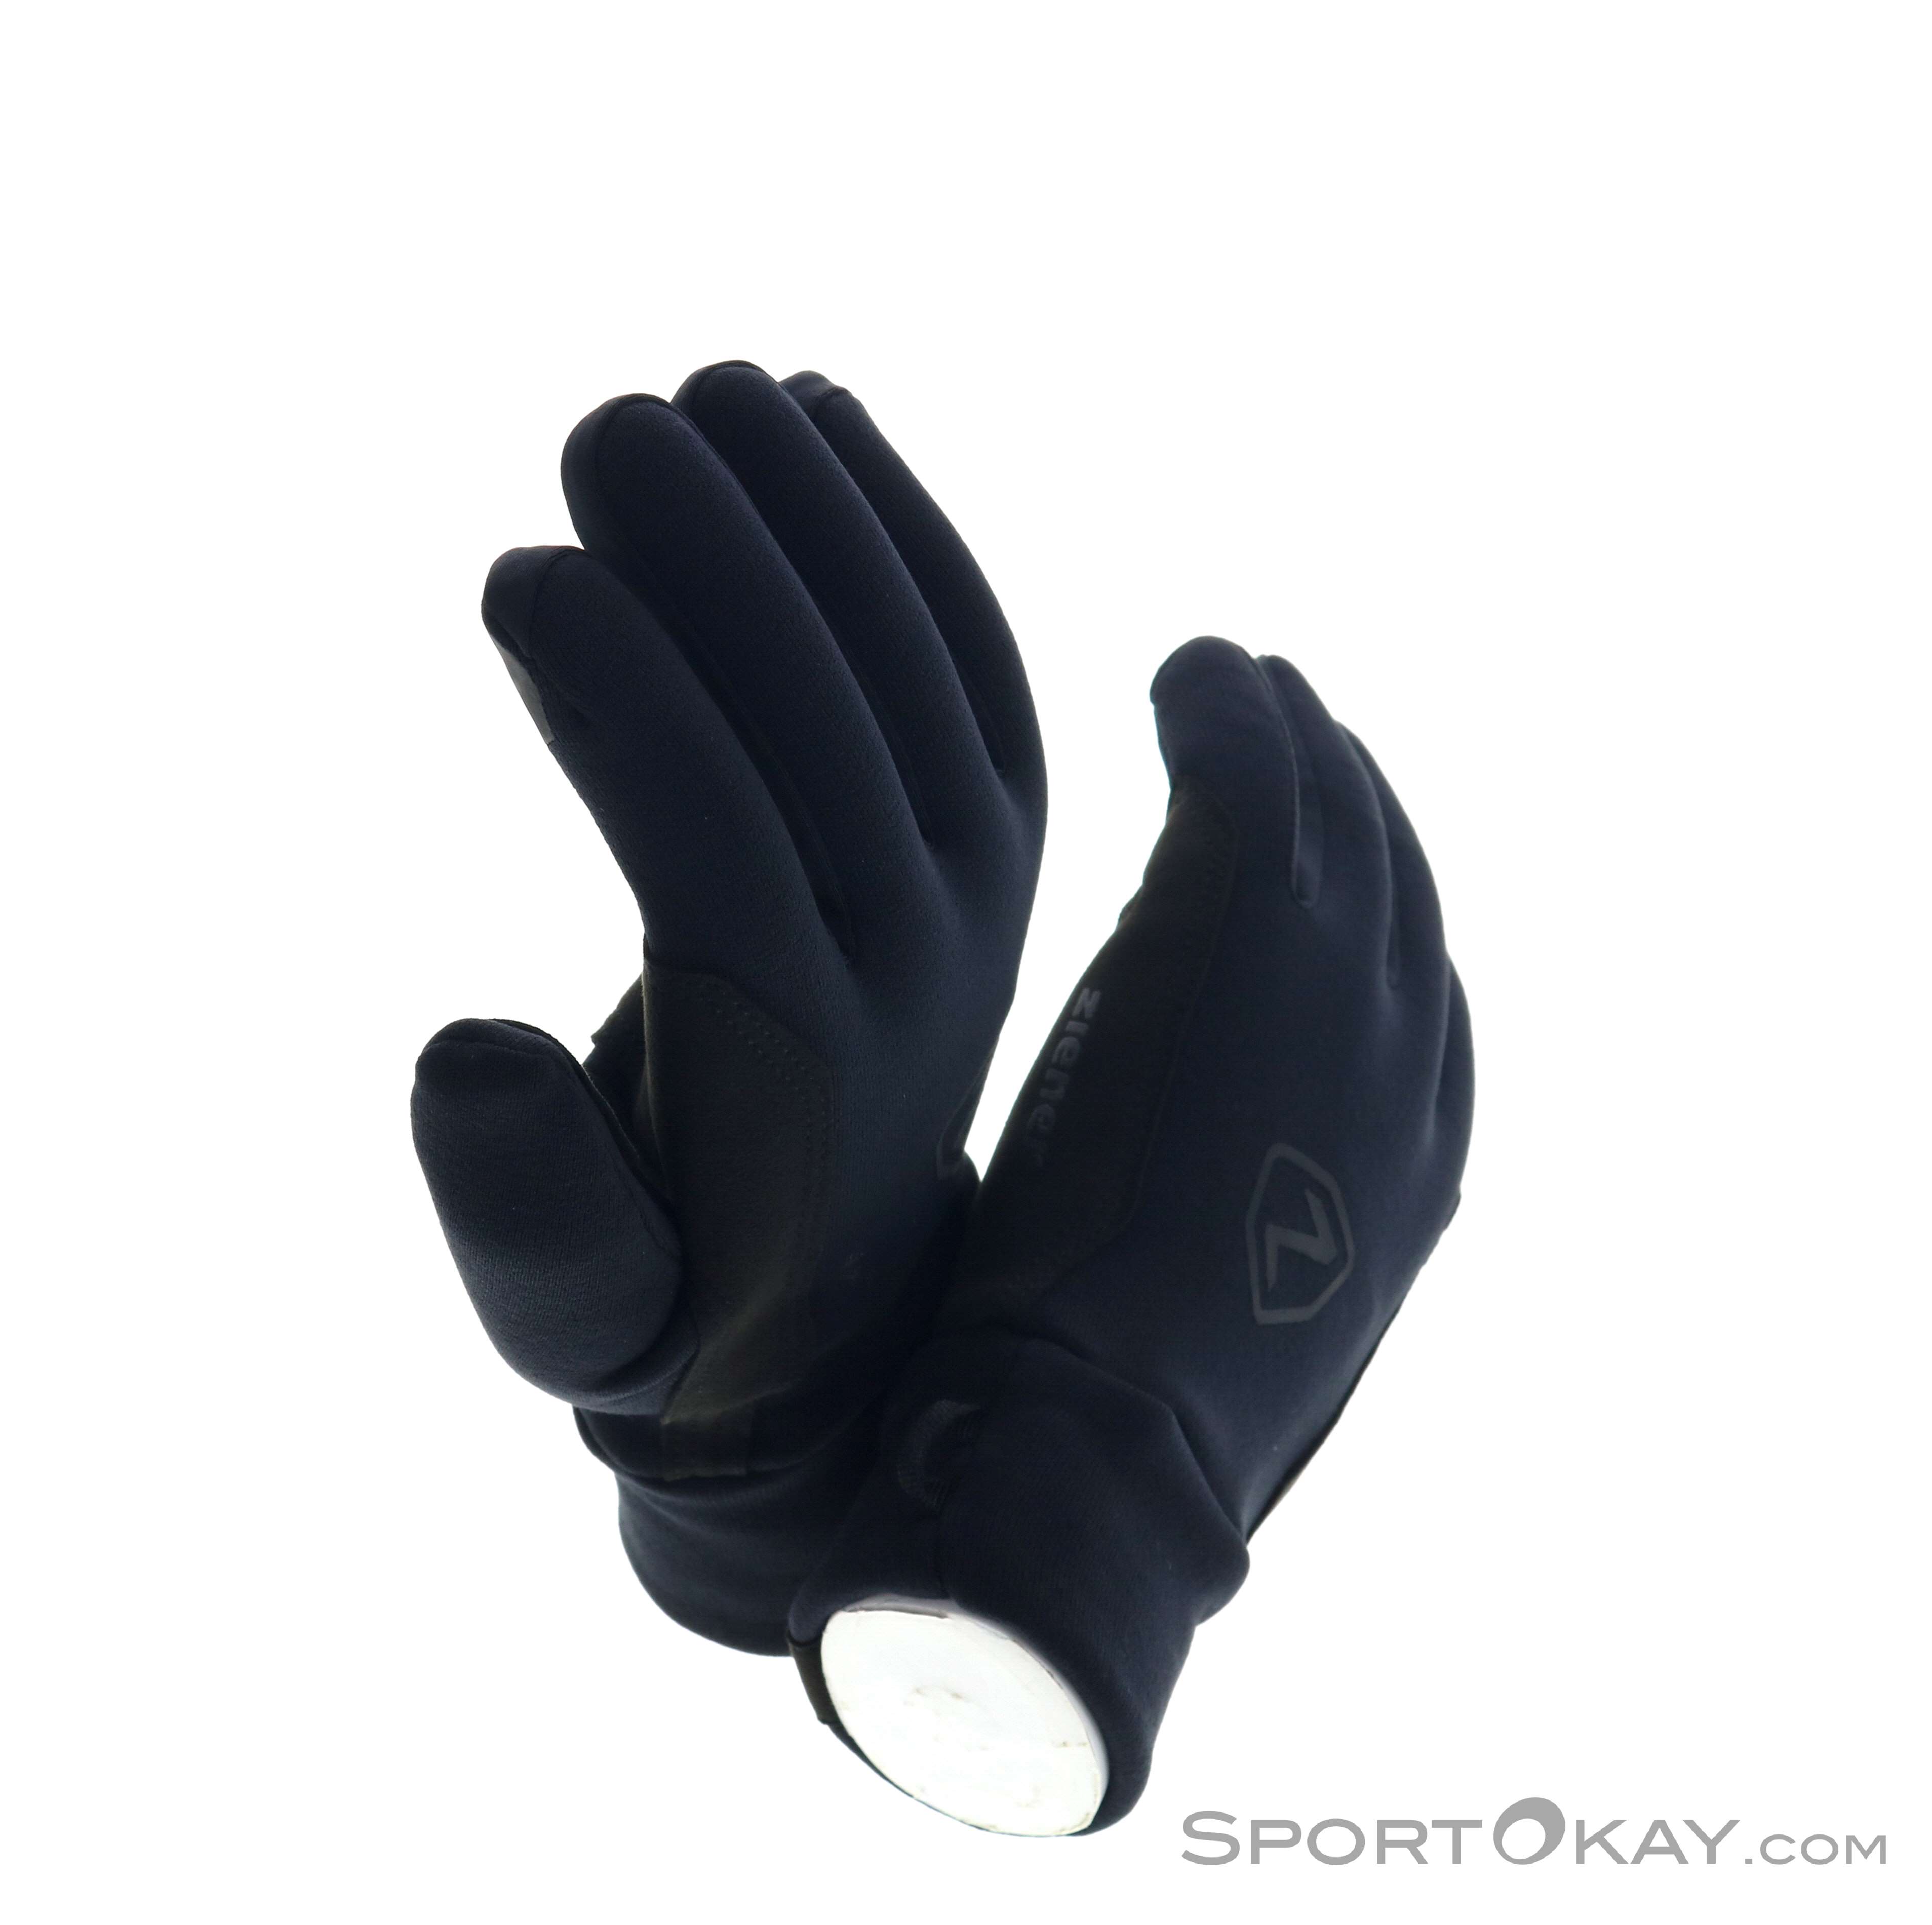 - Outdoor All Touch - Outdoor Gusty Ziener Gloves Gloves - - Clothing